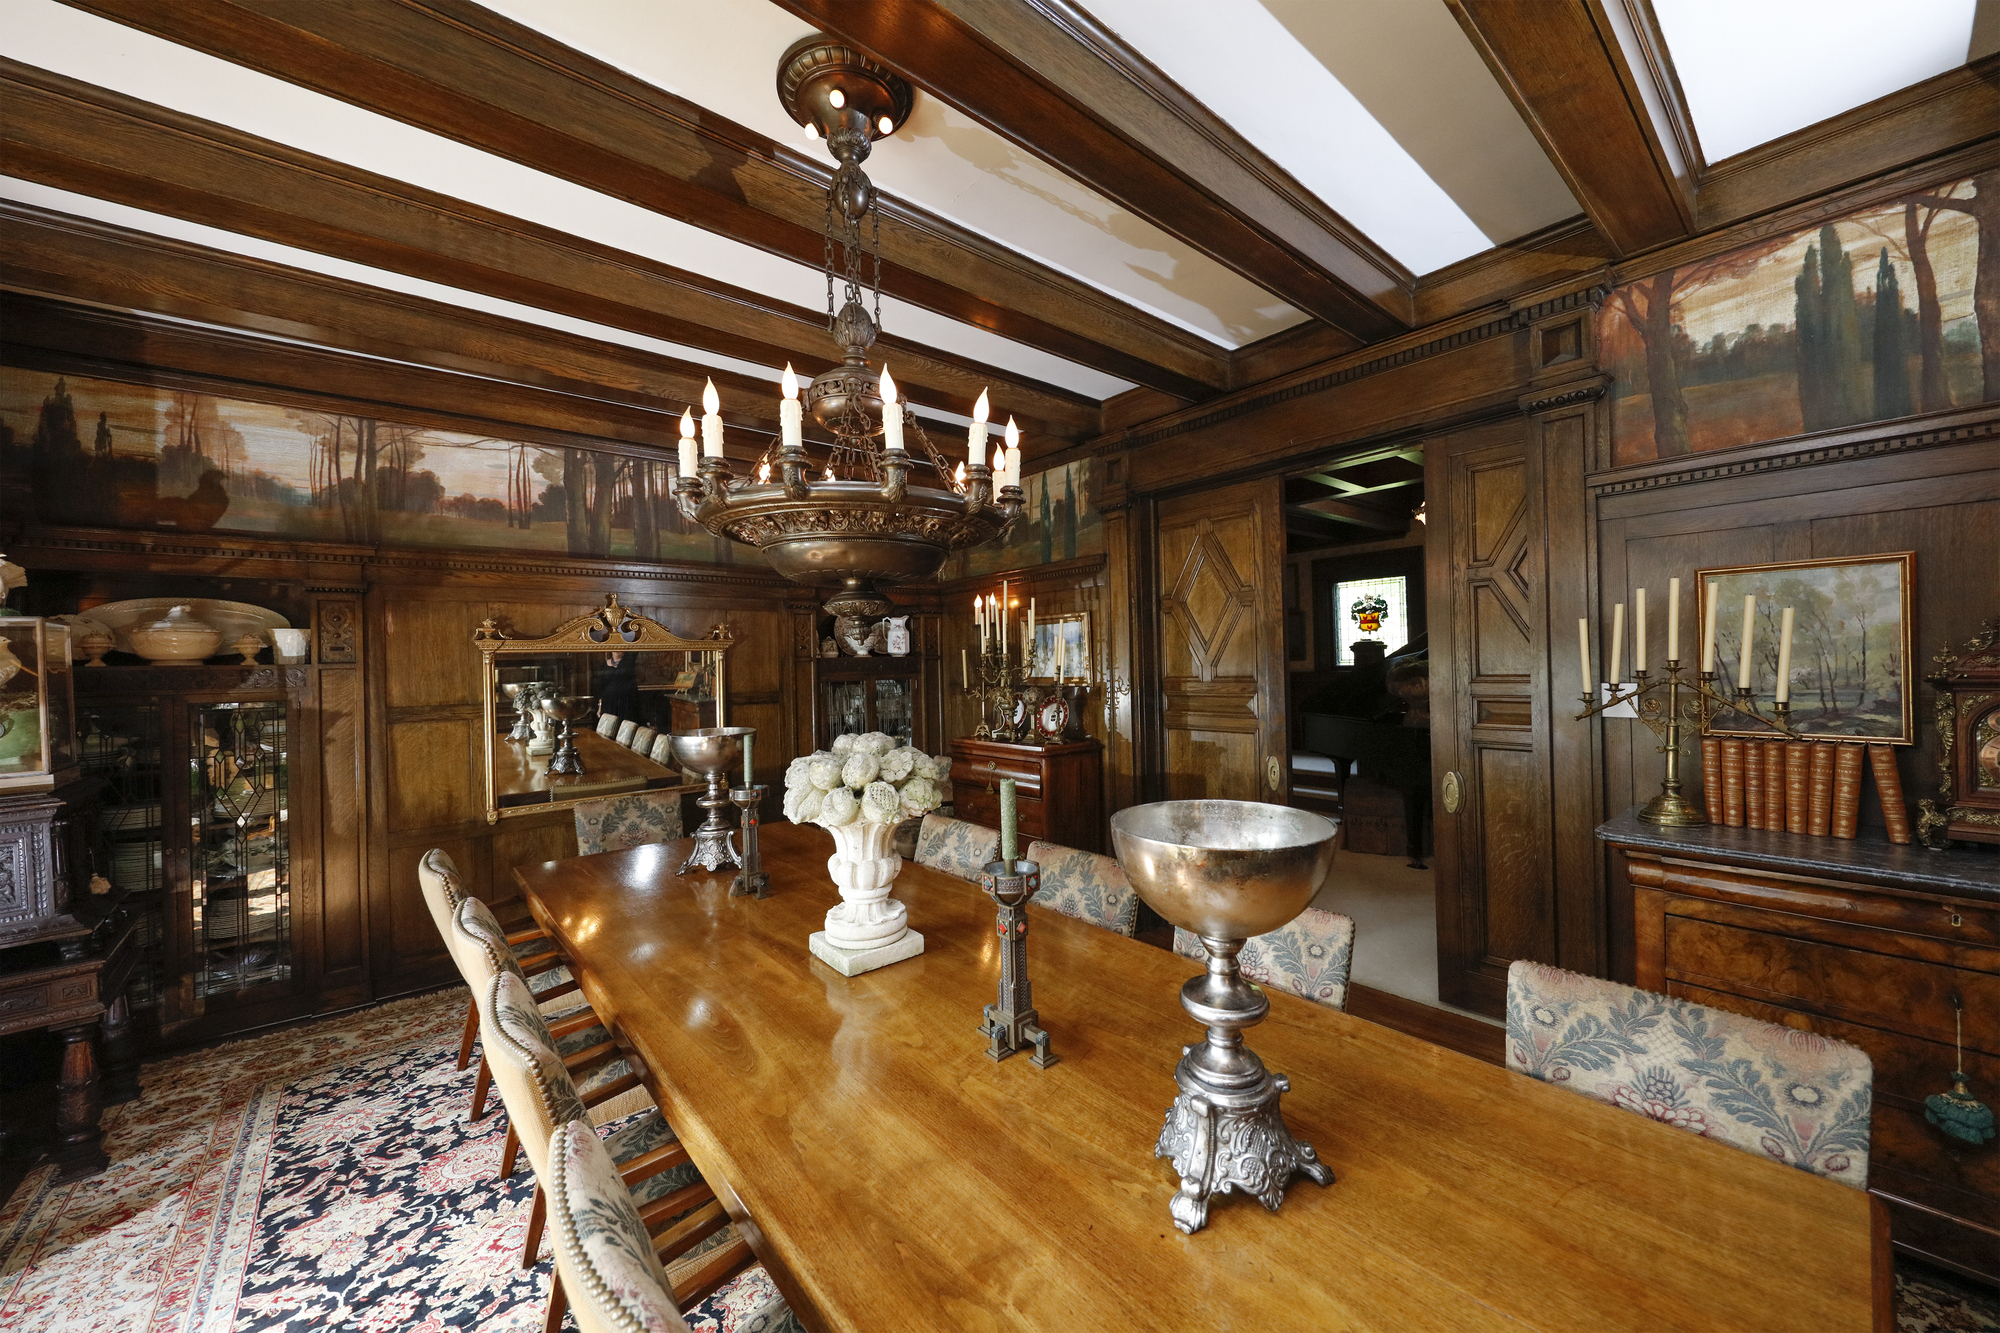 The dining room in the Wilsey family's Summit Avenue home features carved woodwork and beams, built-ins and an original handpainted mural.